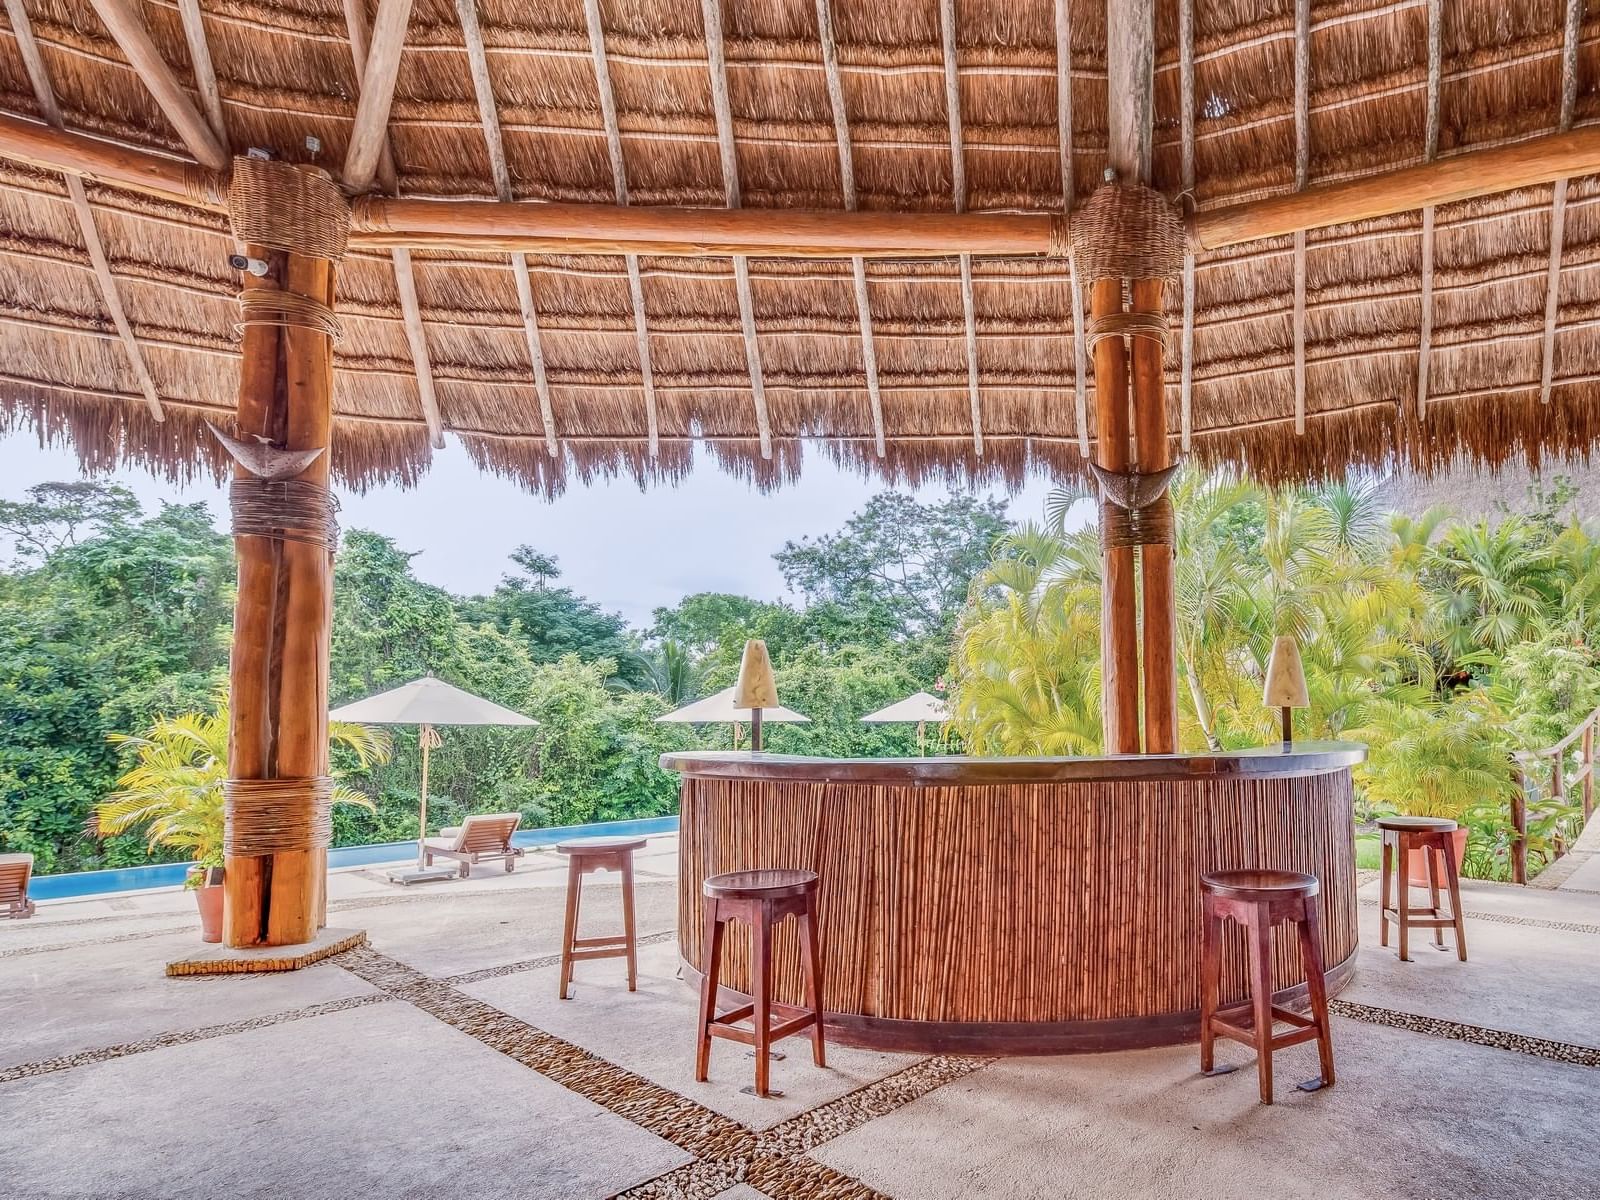 Bar with a straw roof next to the pool at La Colección Resorts